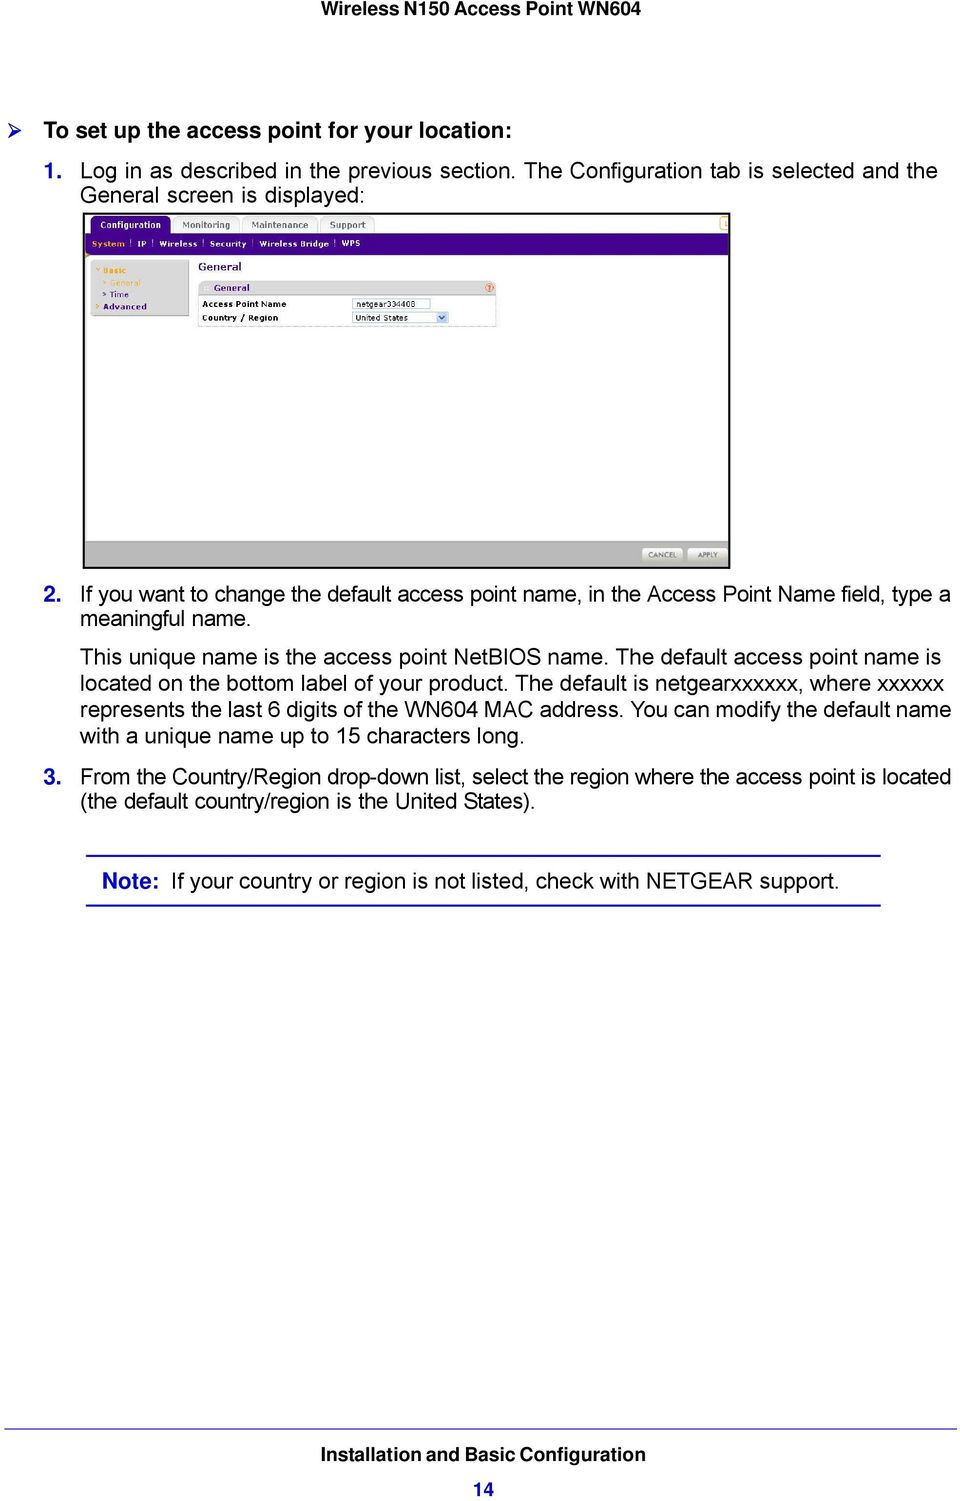 The default access point name is located on the bottom label of your product. The default is netgearxxxxxx, where xxxxxx represents the last 6 digits of the WN604 MAC address.